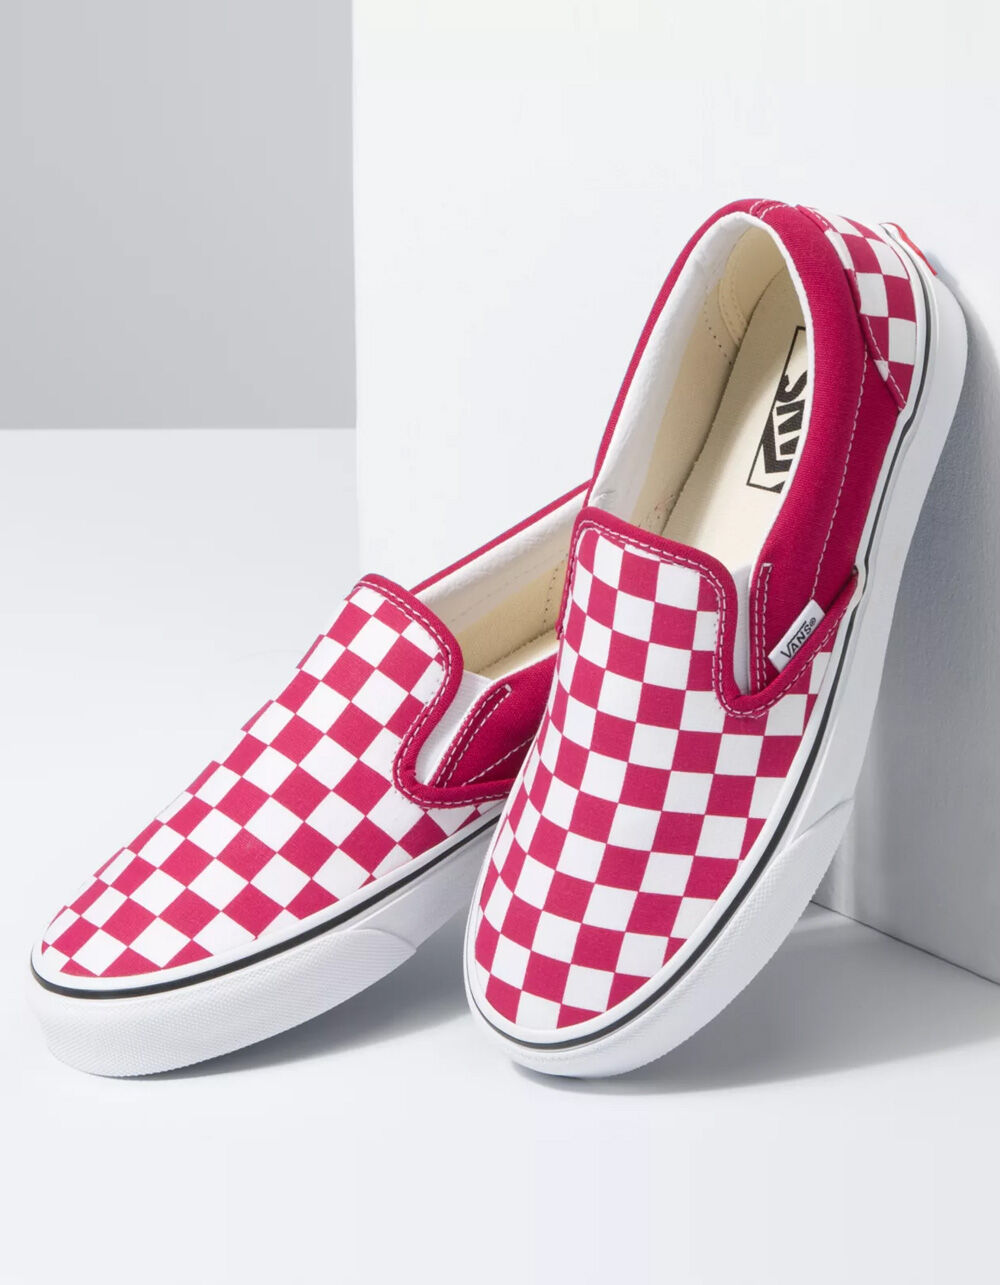 VANS Checkerboard Classic Slip-On Womens Cerise & True White Shoes ...